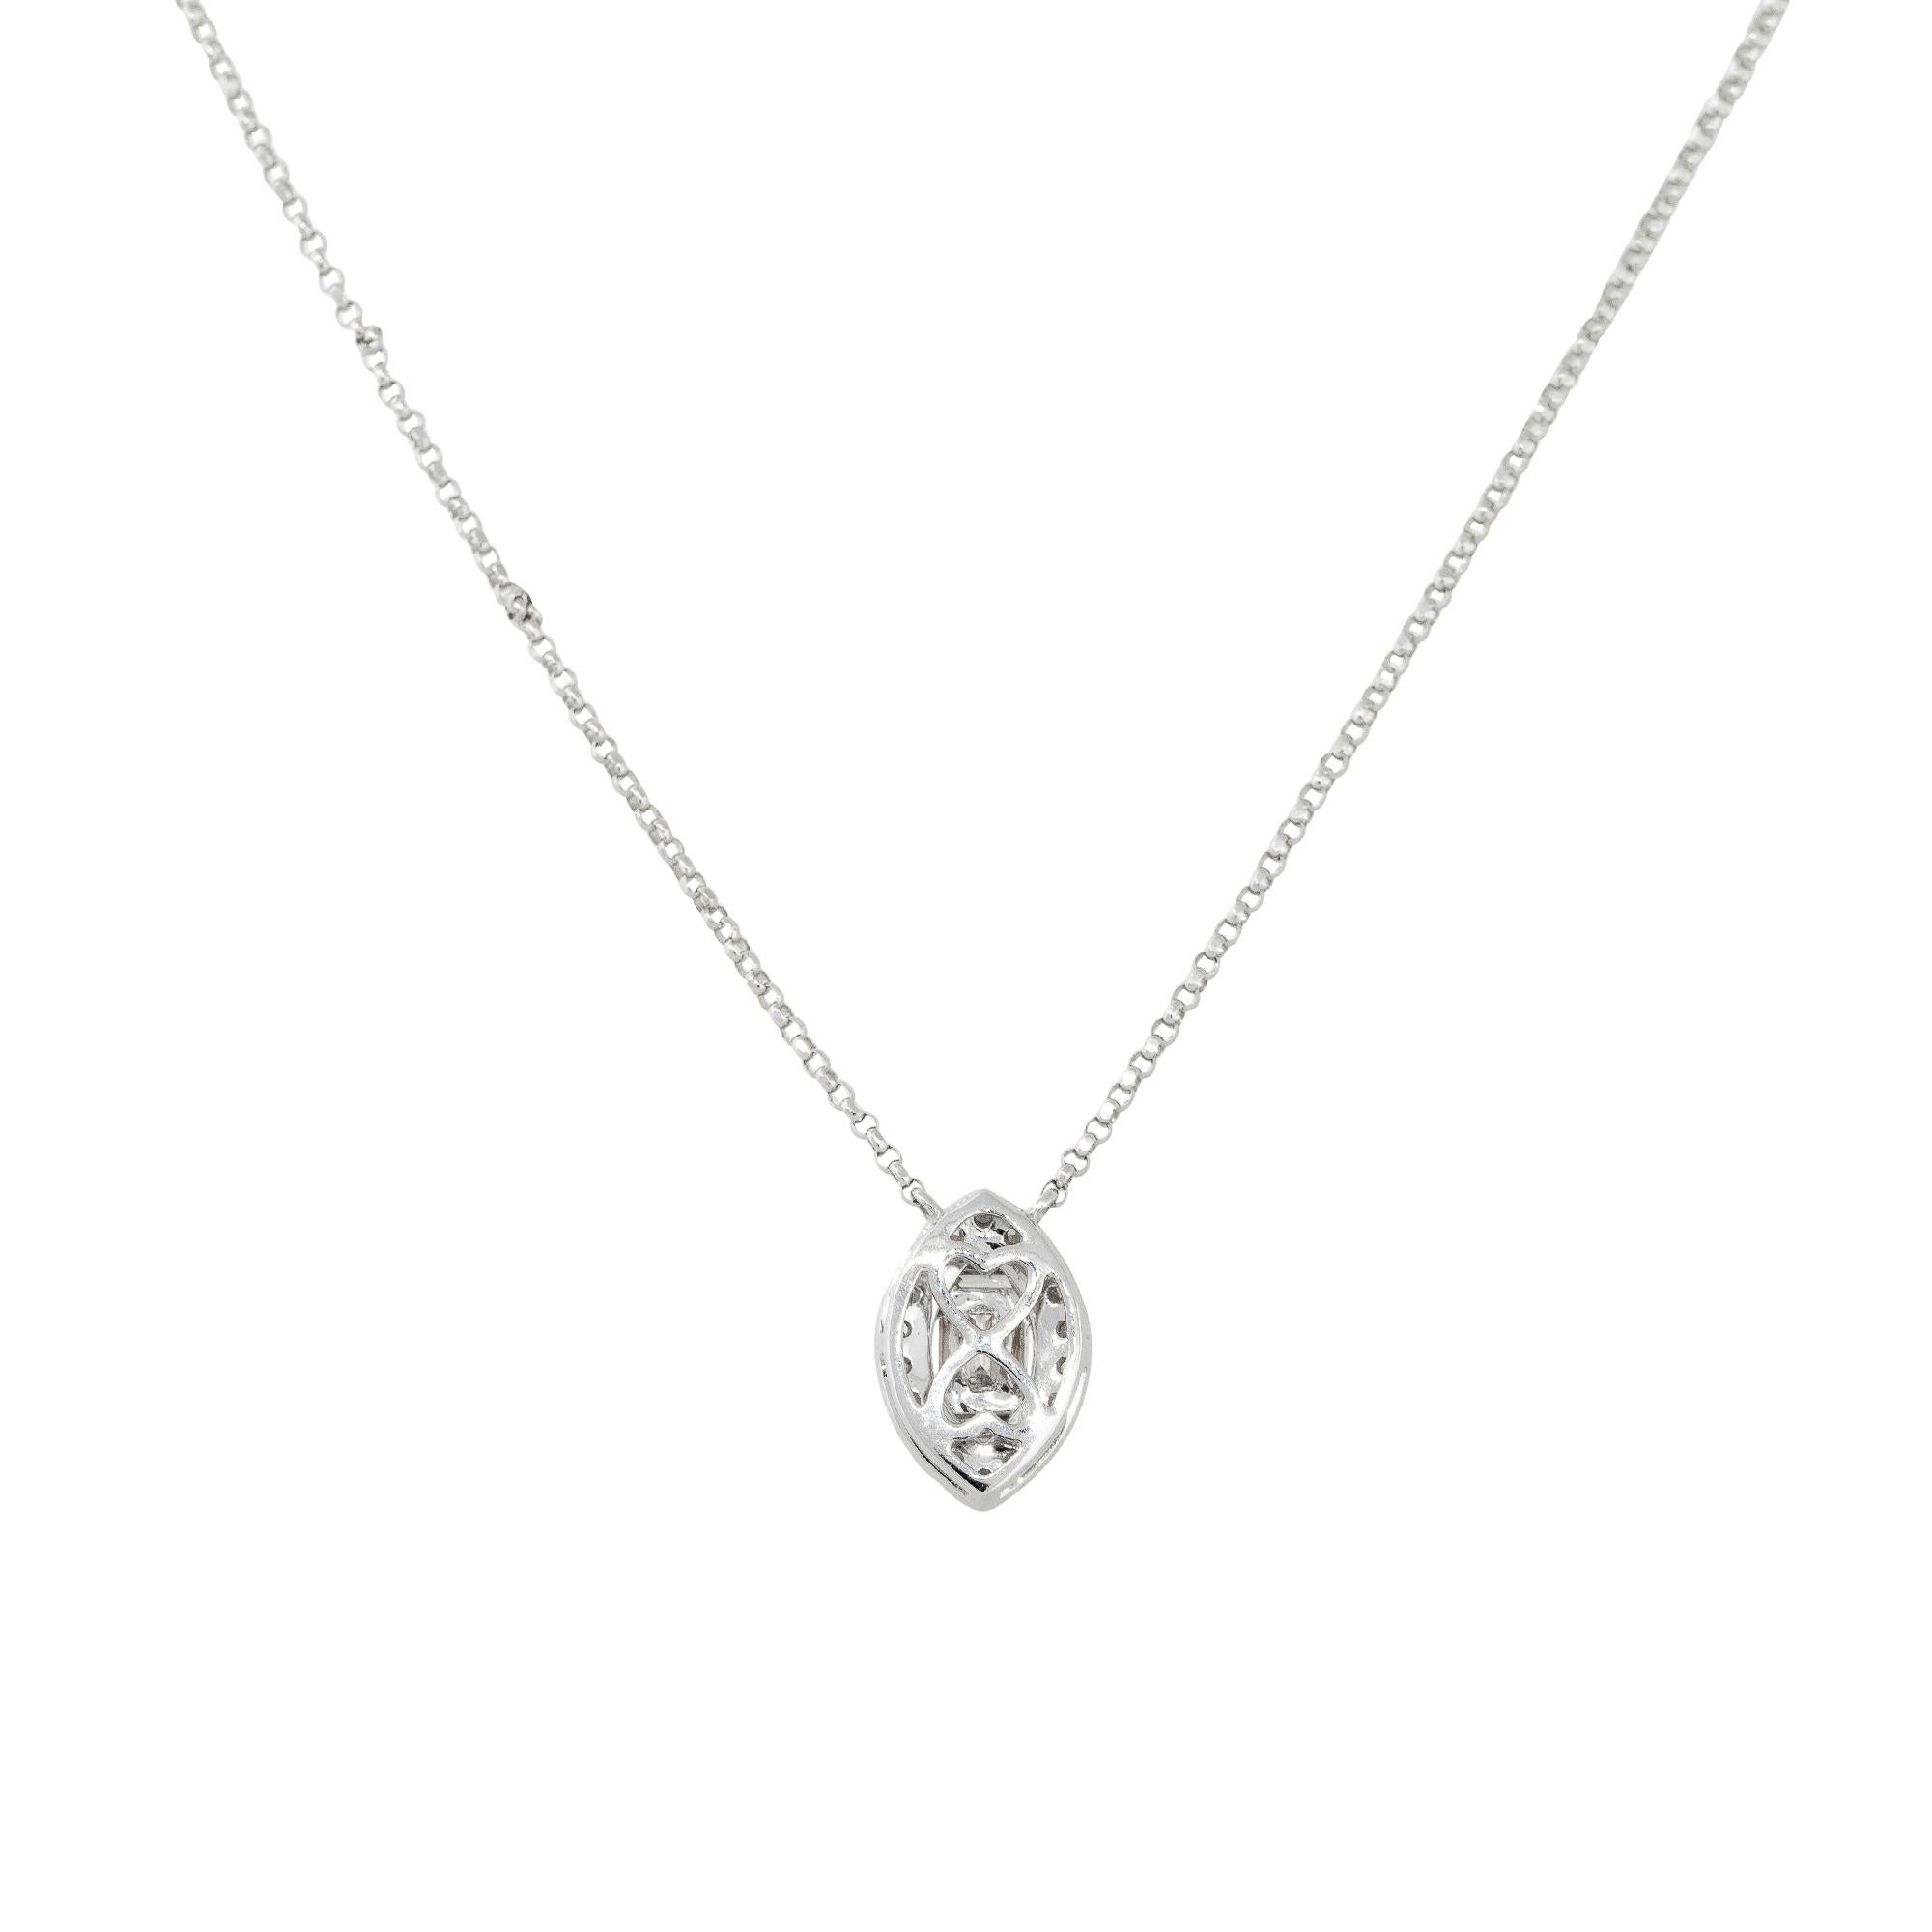 18k White Gold 0.47ctw Diamond Mosaic Pear Shaped Pendant Necklace

Material: 18k White Gold
Diamond Details: Approximately 0.47ctw of Round and Baguette Cut Diamonds. There are 23 Diamonds total
Item Length: Adjustable from 16-18